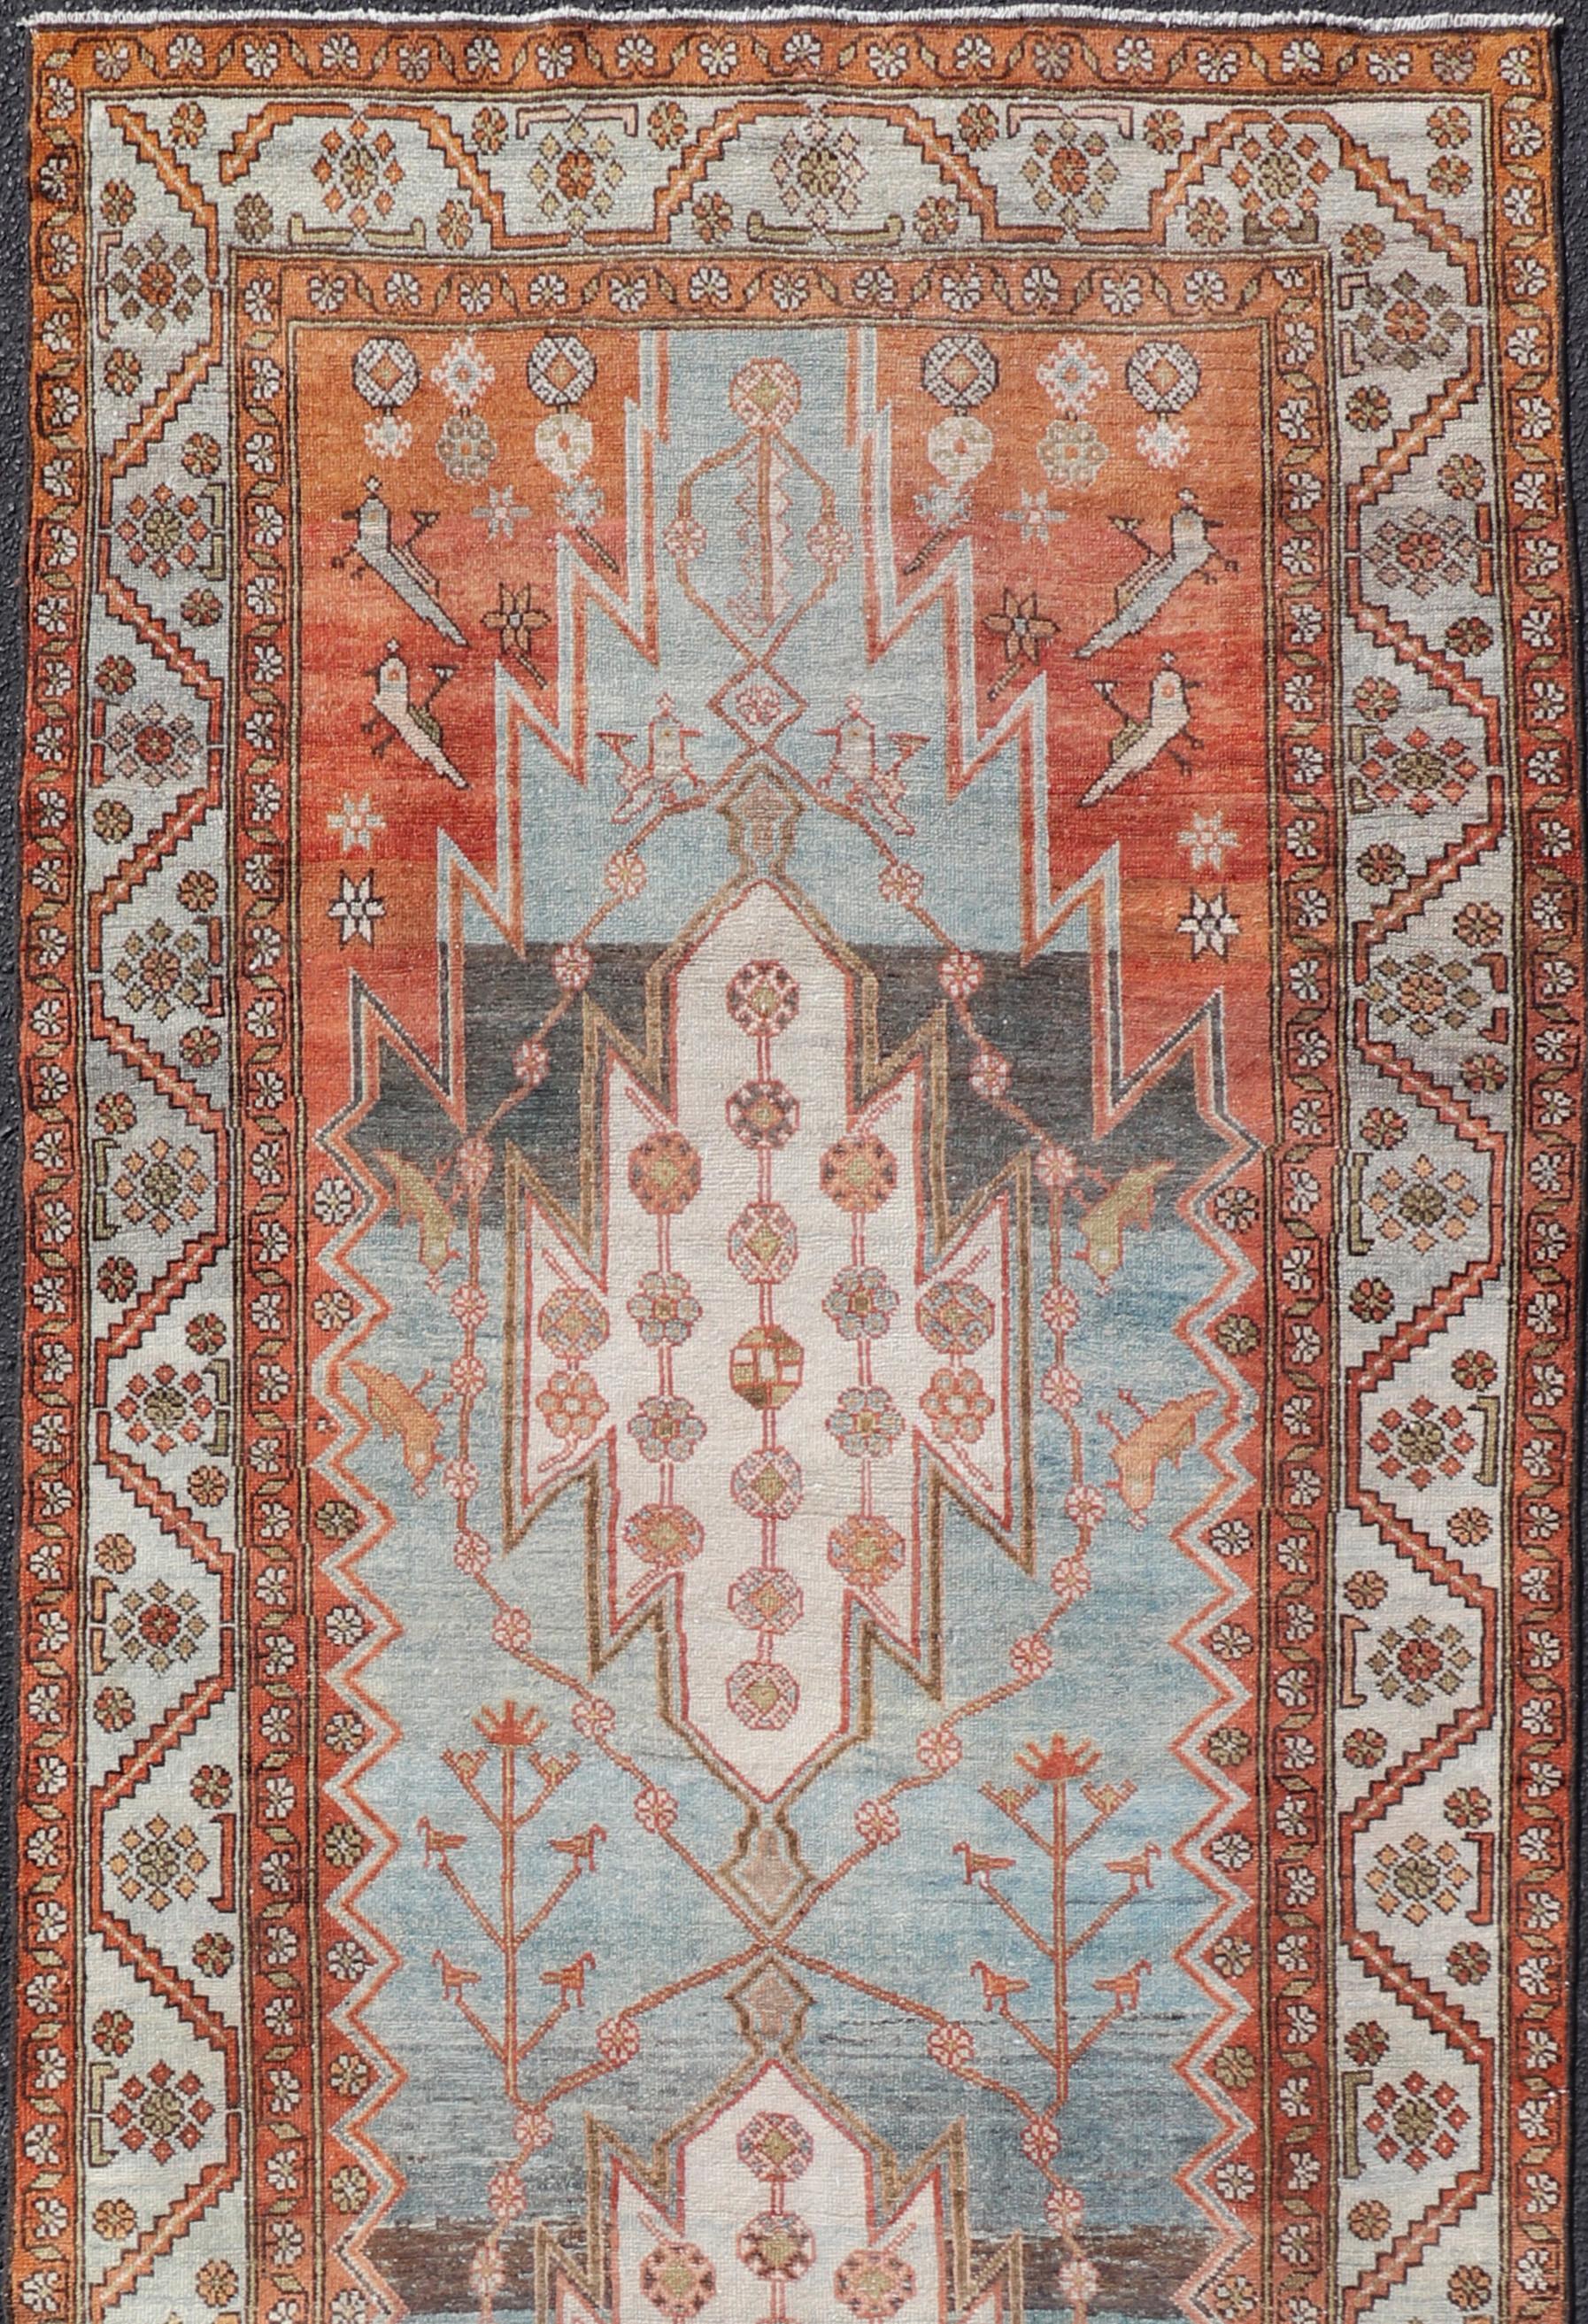 Wide Gallery runner, antique Persian Malayer, Keivan Woven Arts / rug EMB-9522-P13066, country of origin / type: Iran / Malayer, circa 1920.

Measures: 4'5 x 13'9.     

This magnificent antique Persian long Malayer wide runner,  bears a beautiful,